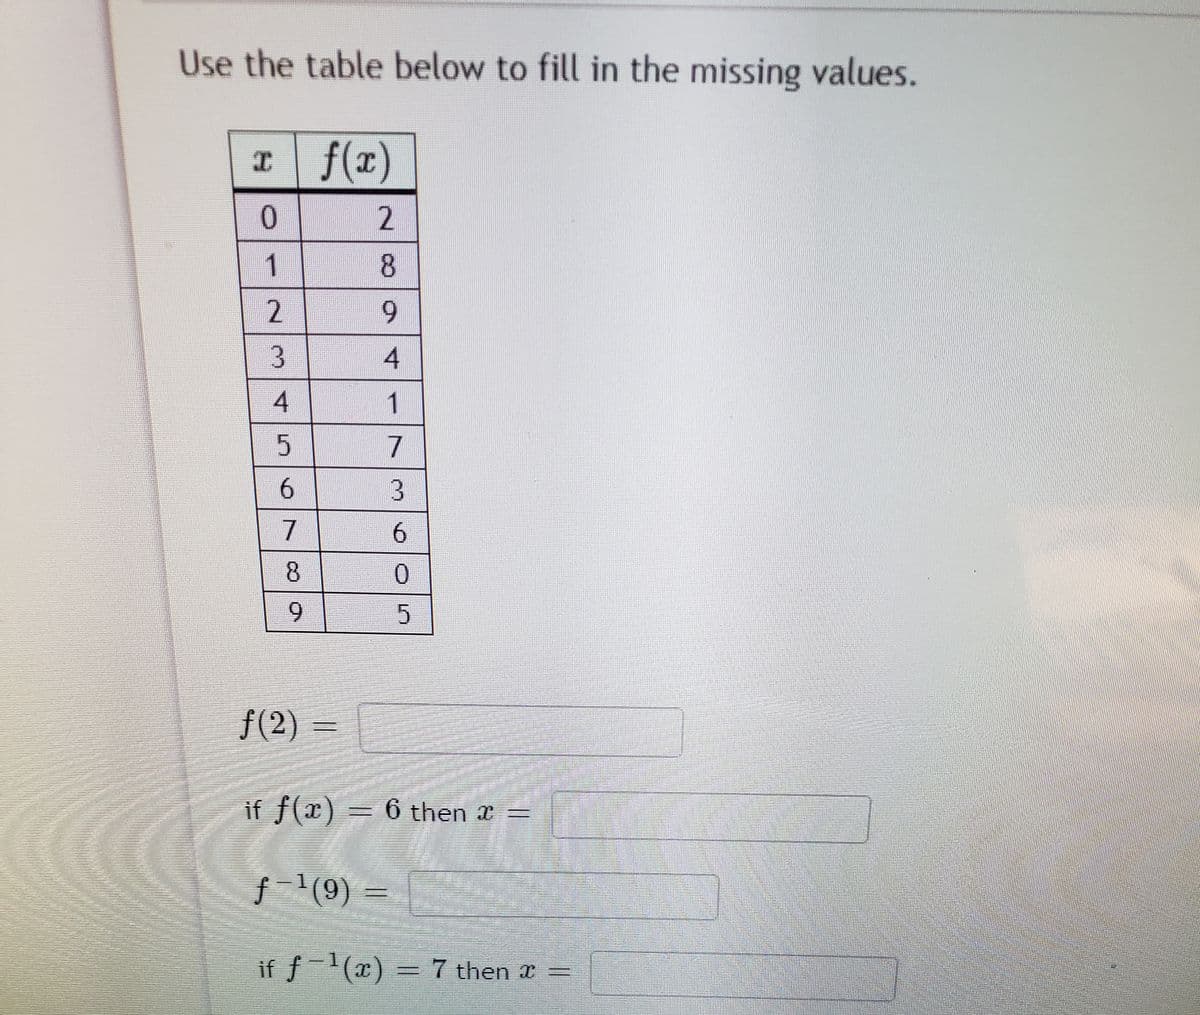 Use the table below to fill in the missing values.
I
f(r)
2
1
8.
1
7
6.
3.
6.
7
8
0.
6.
f(2) :
if f(x)
) = 6 then a =
f-1(9)
if f(x) = 7 then x=
4.
O5
23
4.
